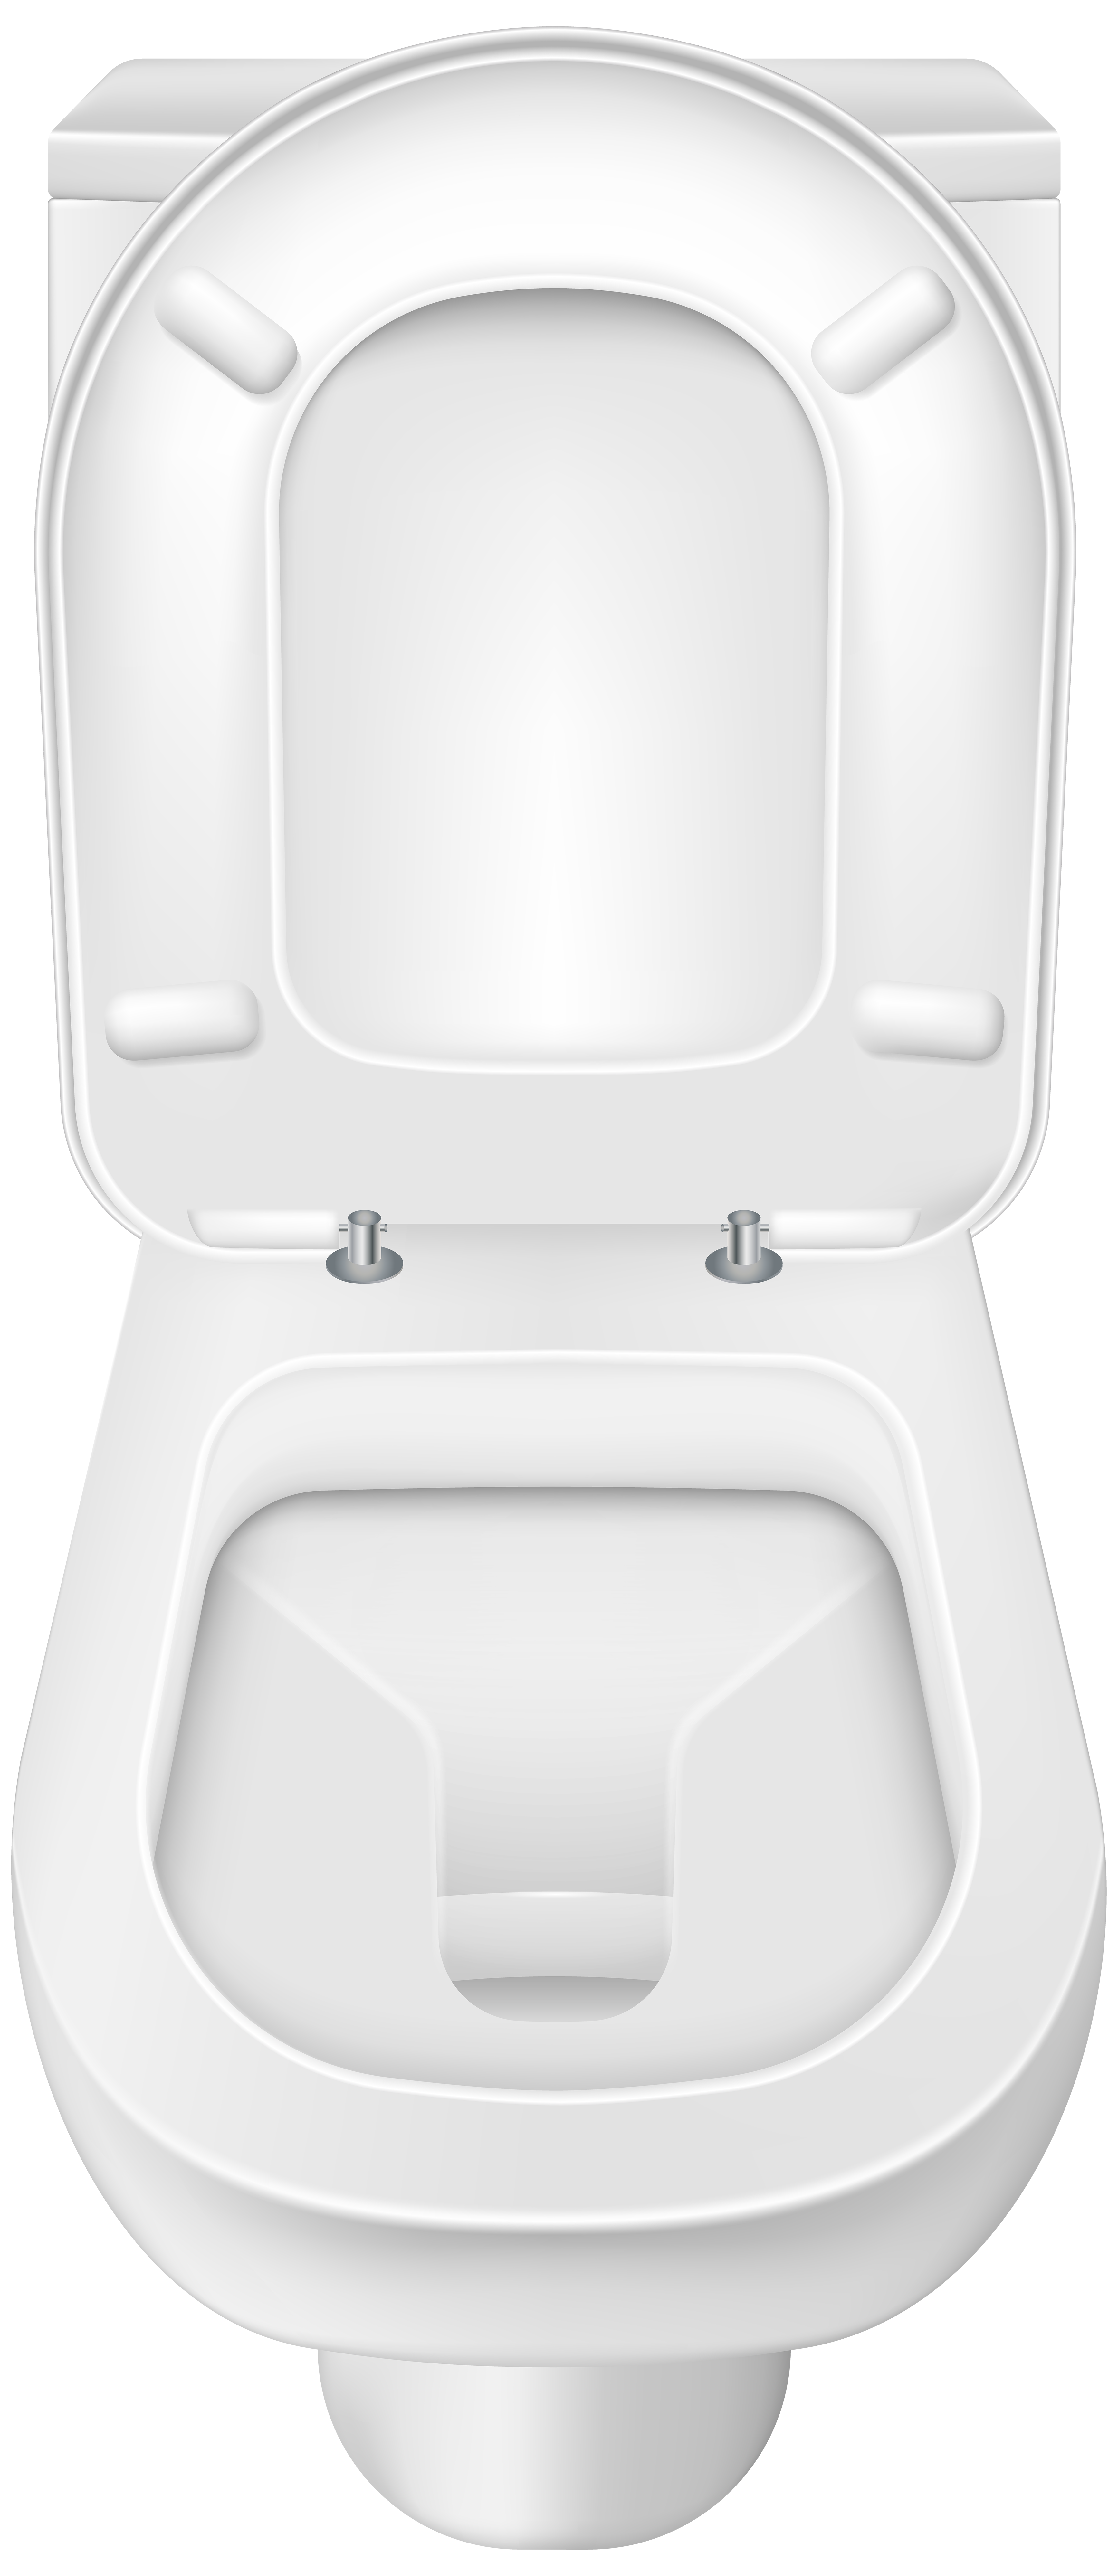 Toilet seat png.